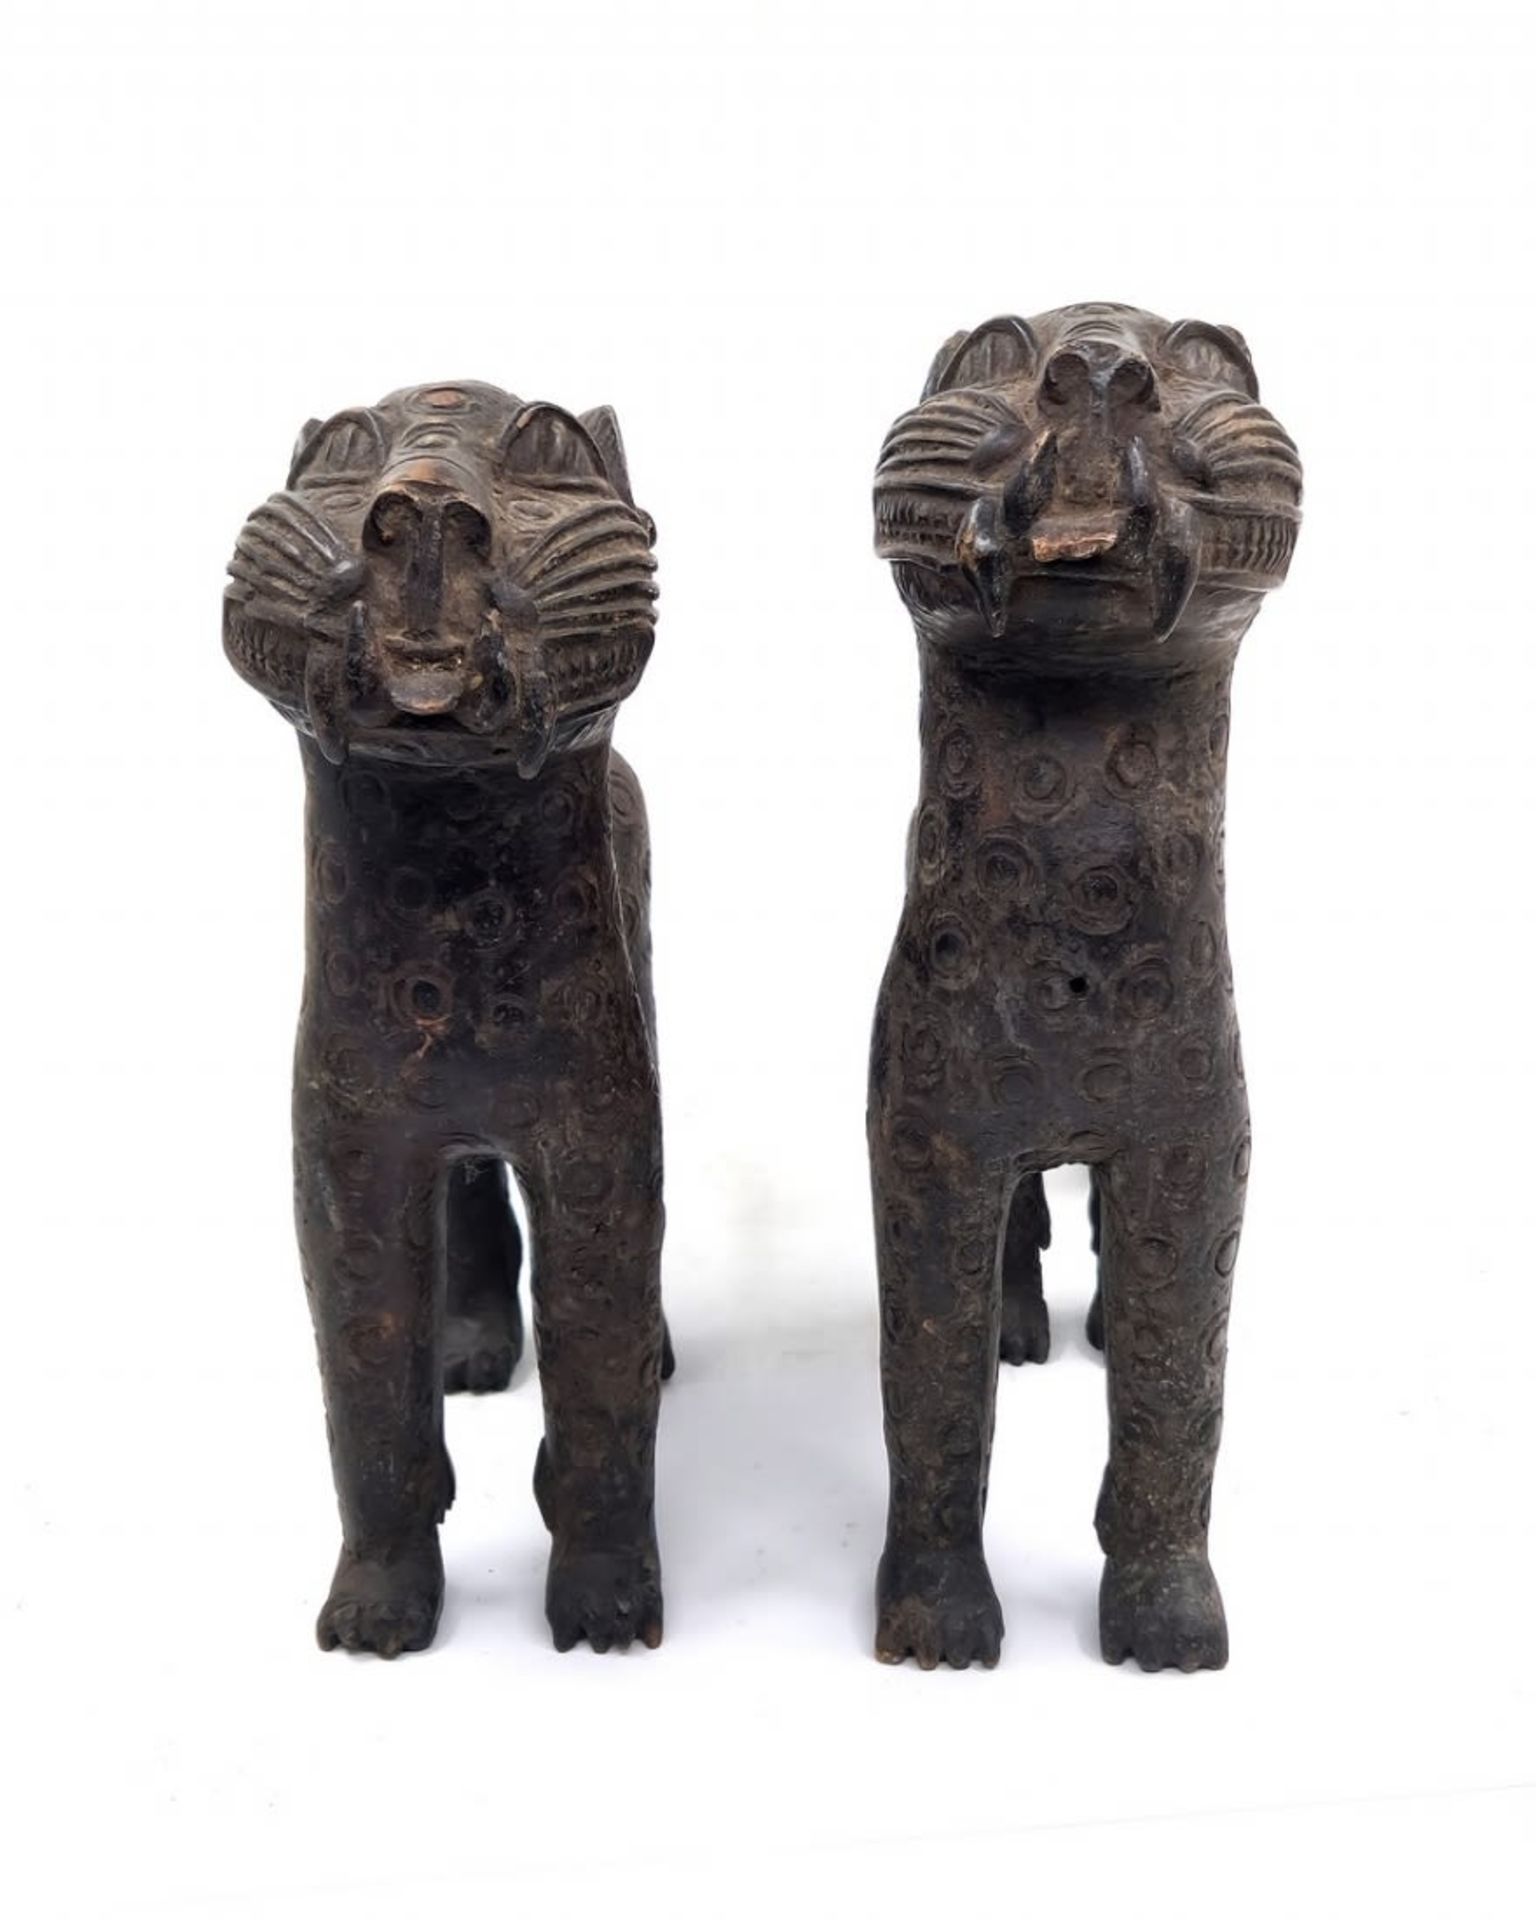 A pair of antique African statues, around hundred years old, in the form of panthers, made in ' - Image 2 of 8